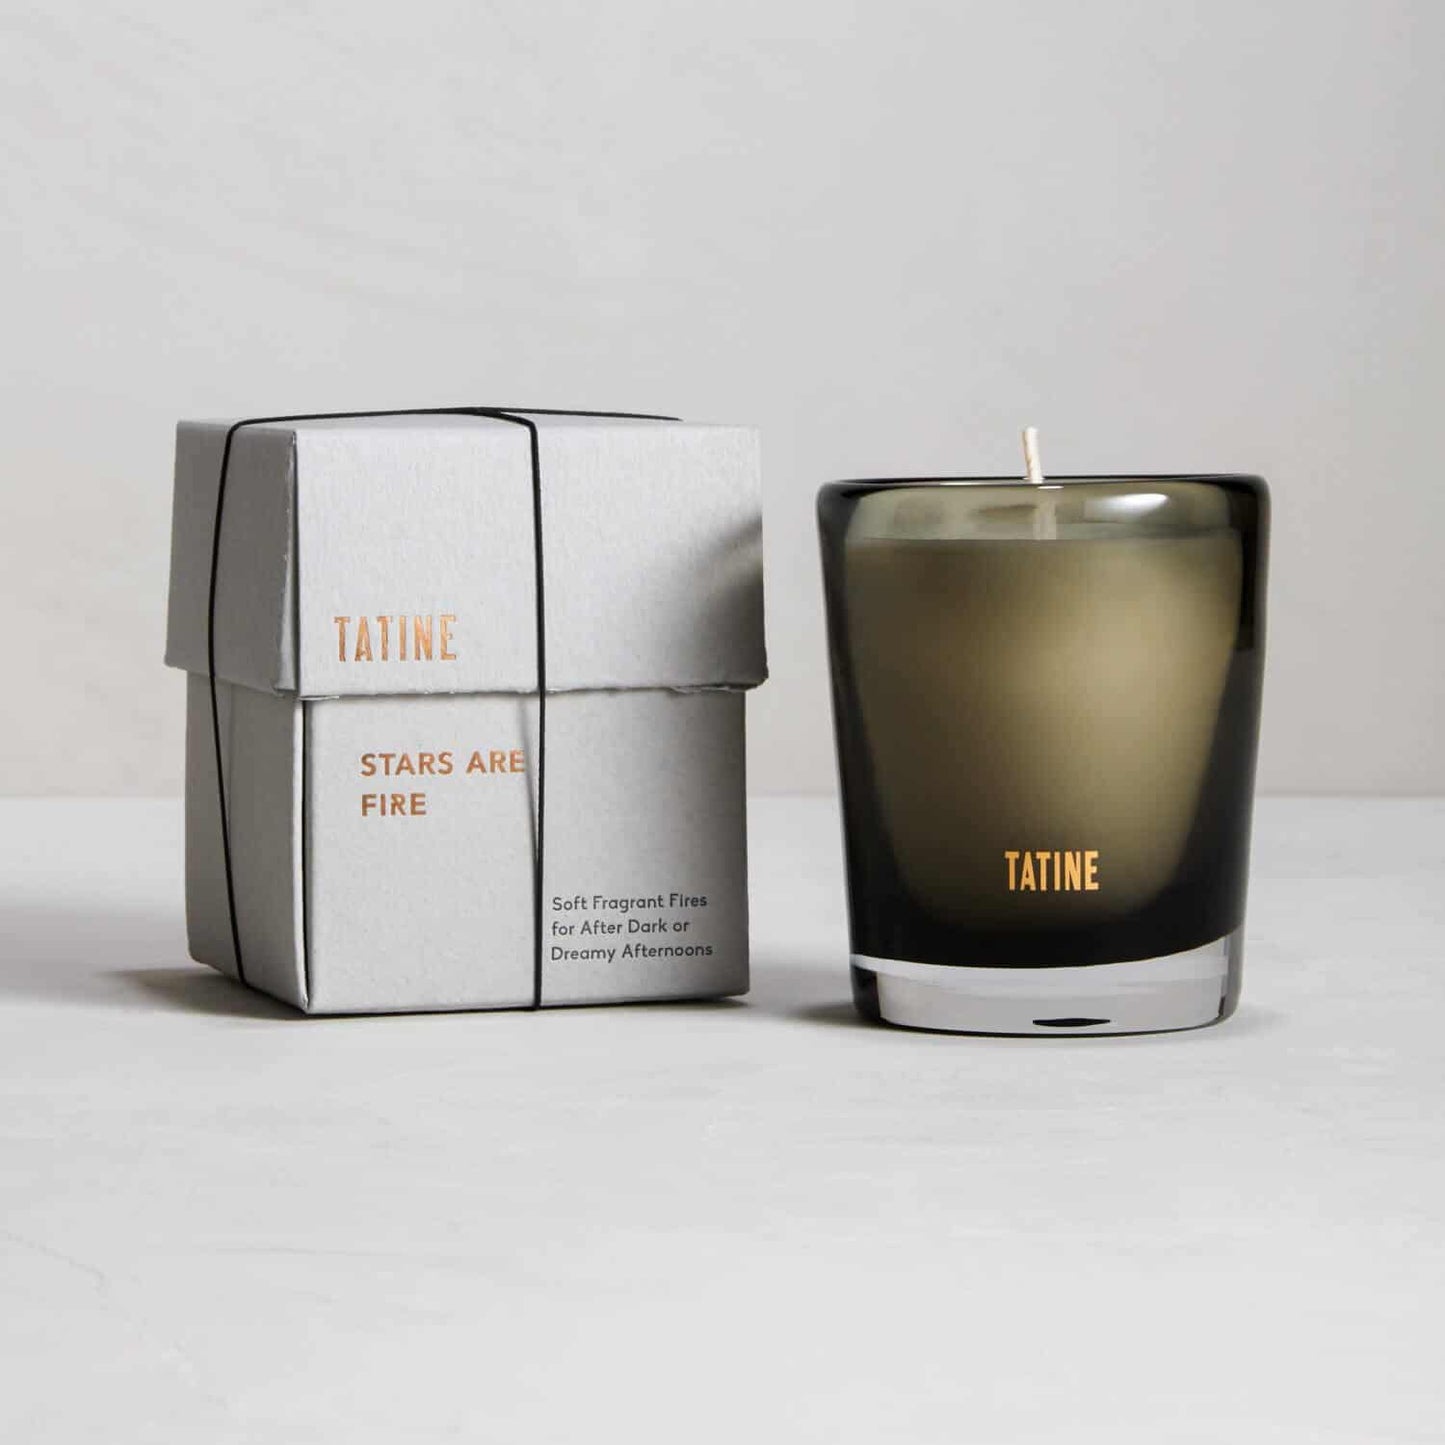 Tatine Holy Basil Scented Candle - Osmology Scented Candles & Home Fragrance